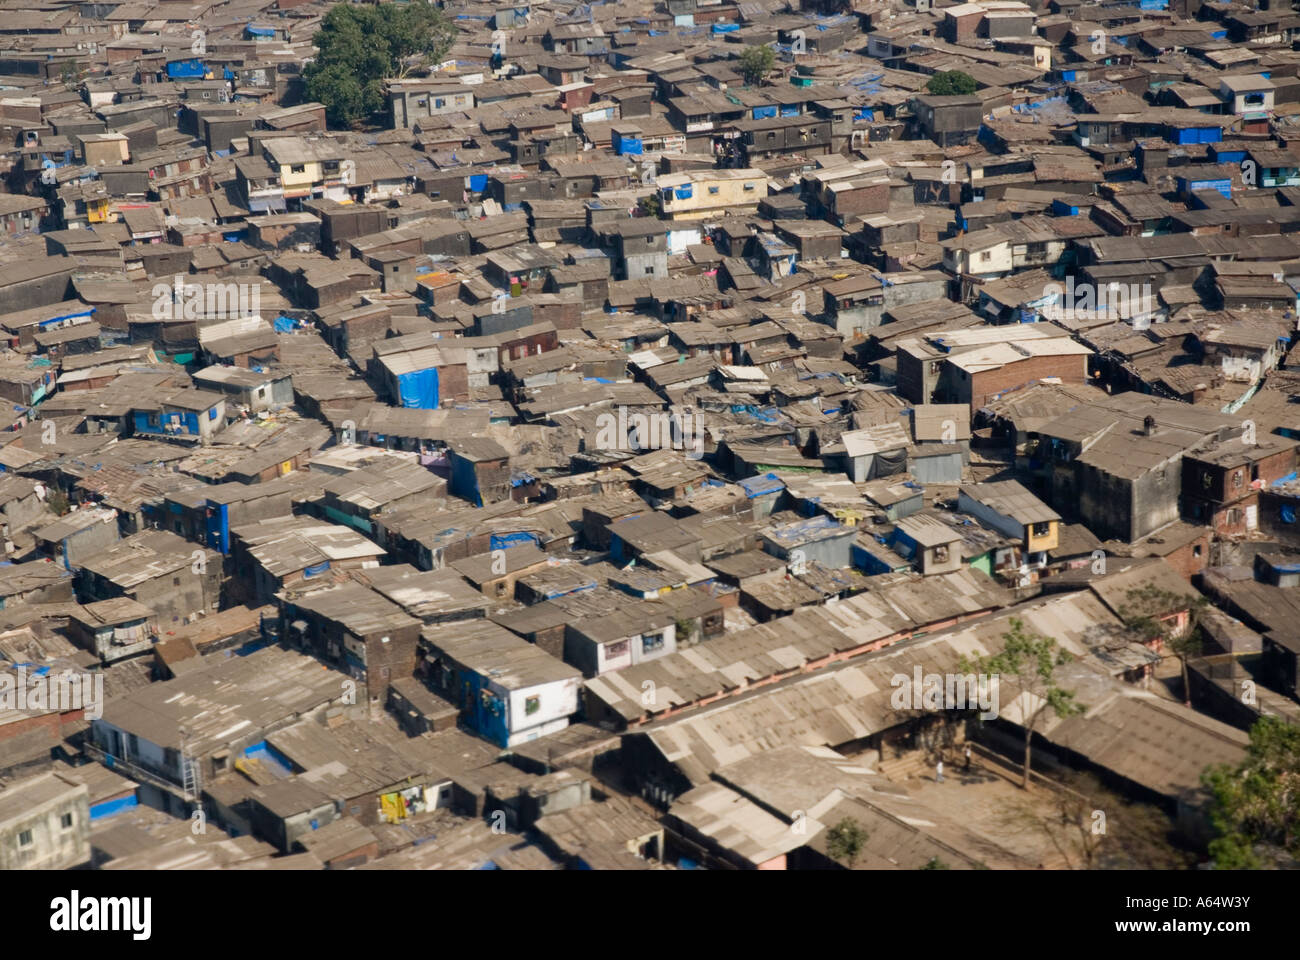 An aerial view of Dharavi slum area in Mumbai India which is the largest in Asia Stock Photo